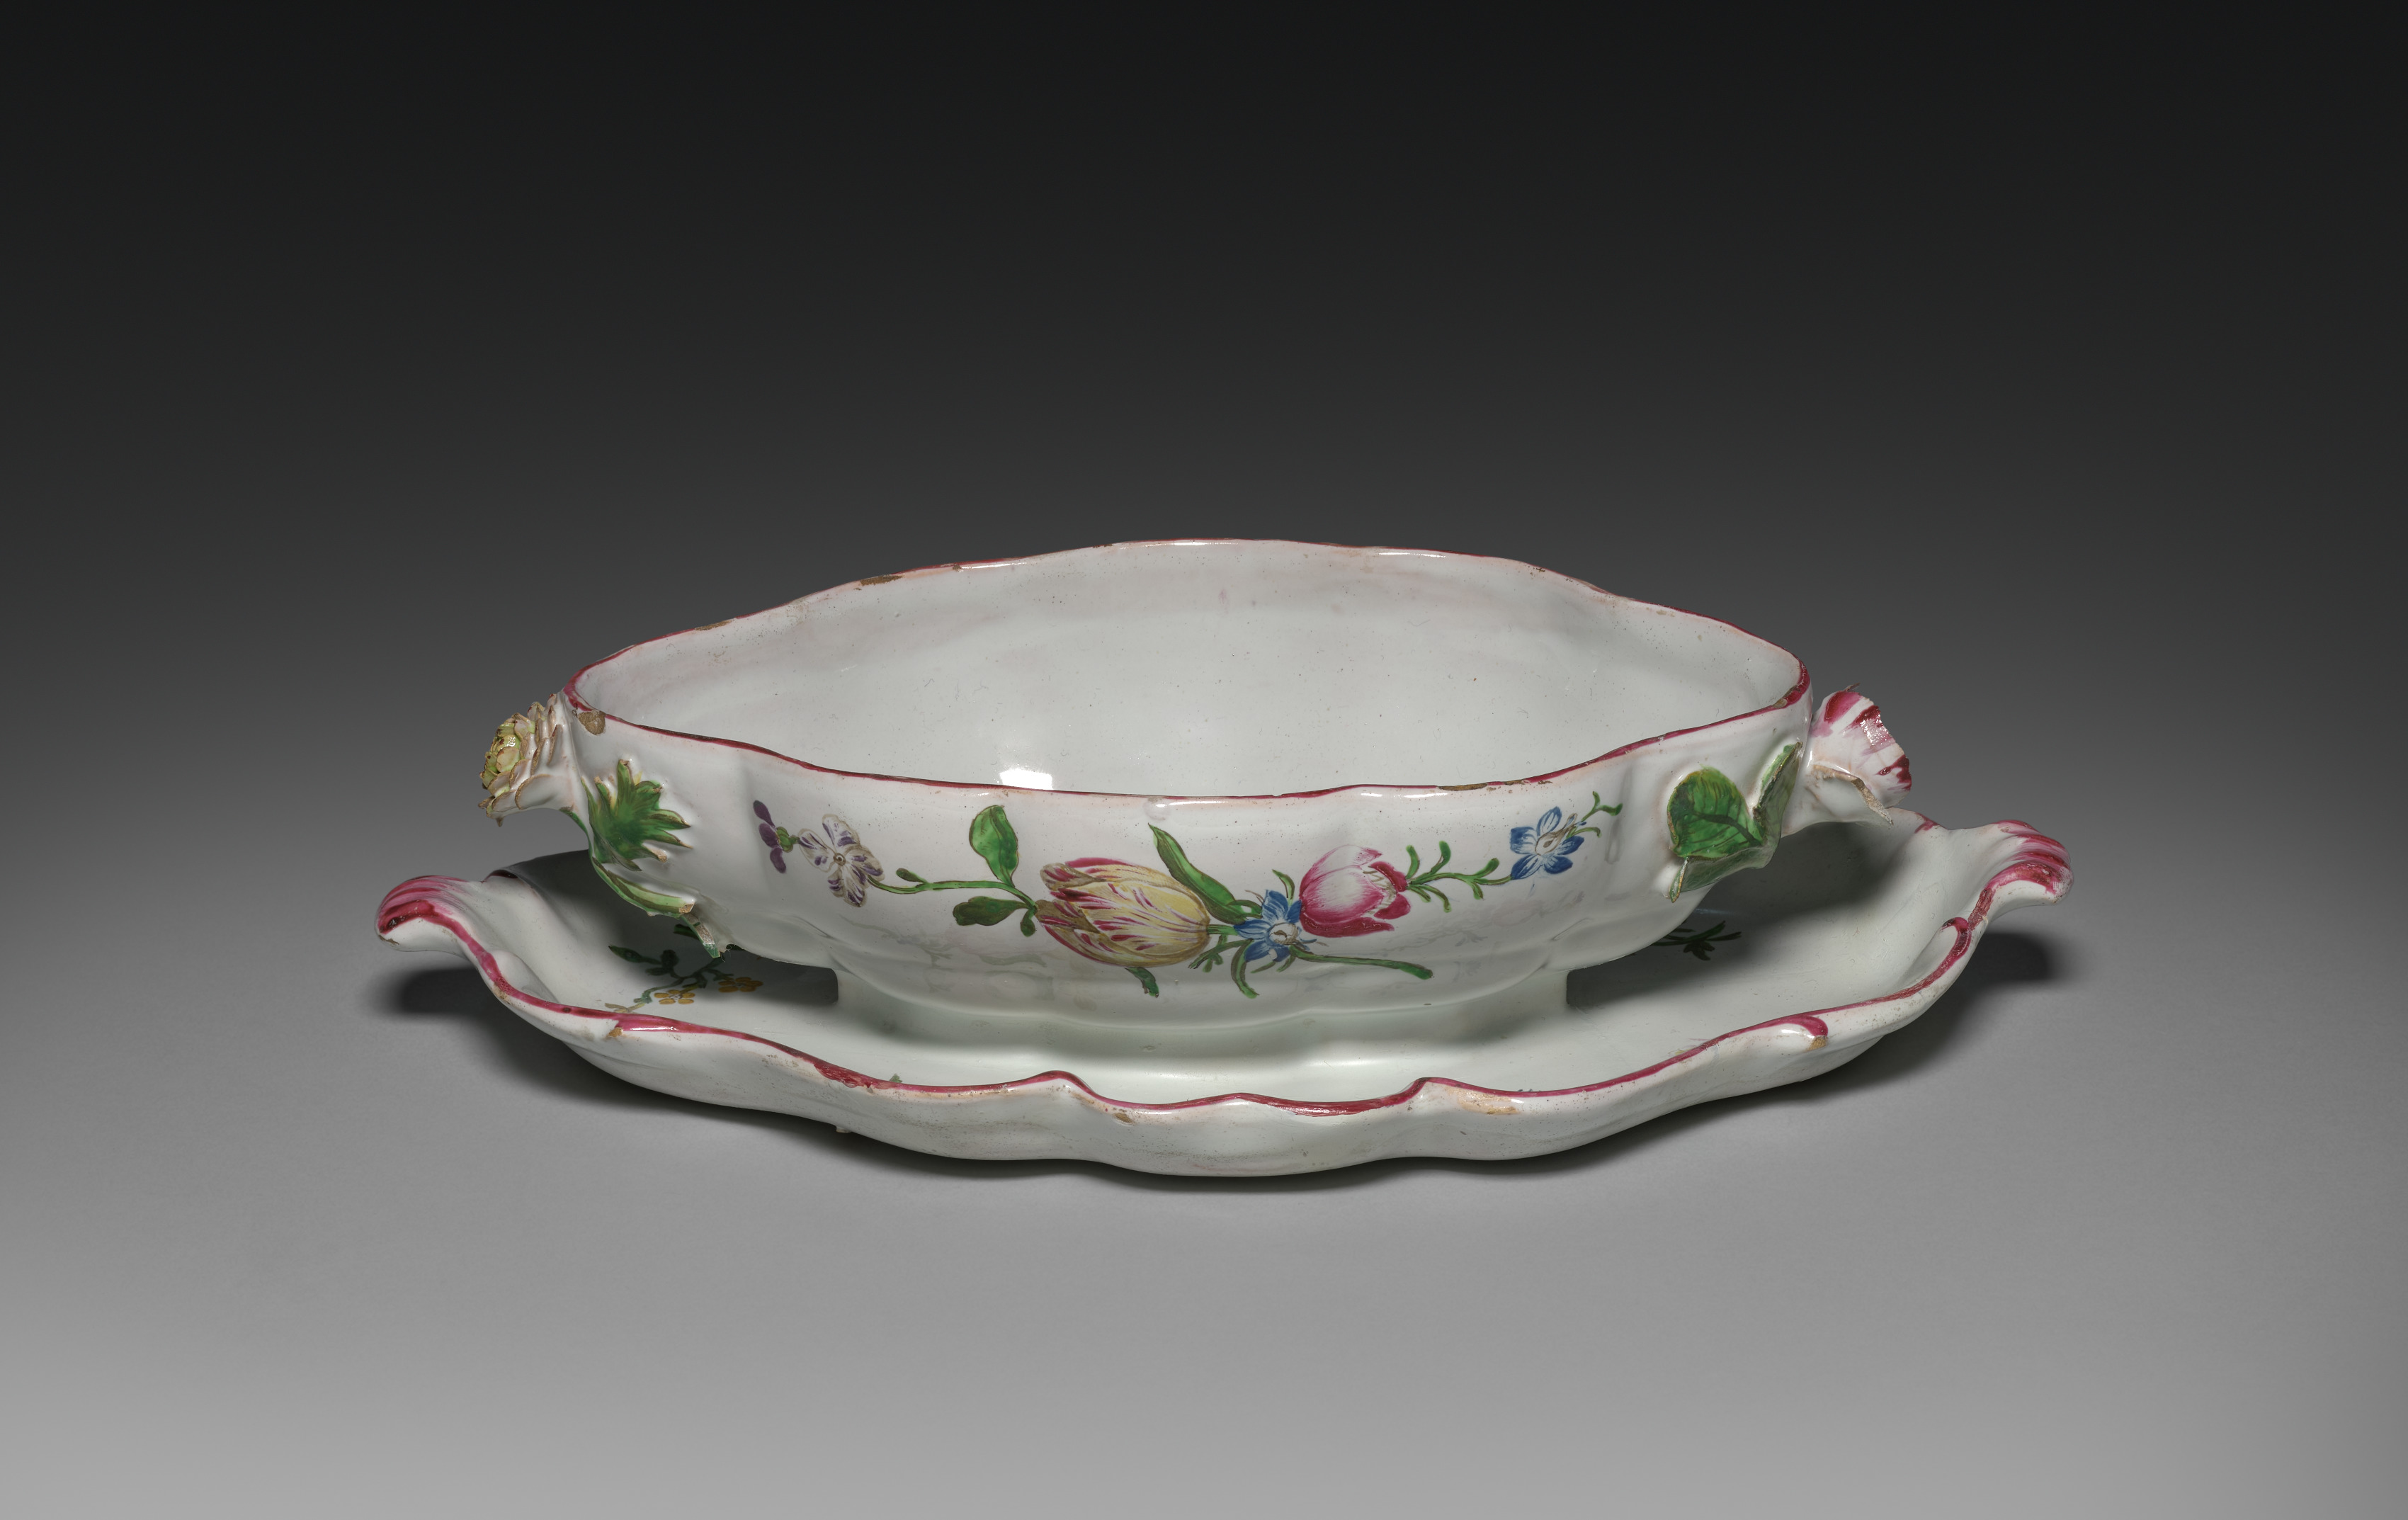 Sauce Tureen with Attached Stand